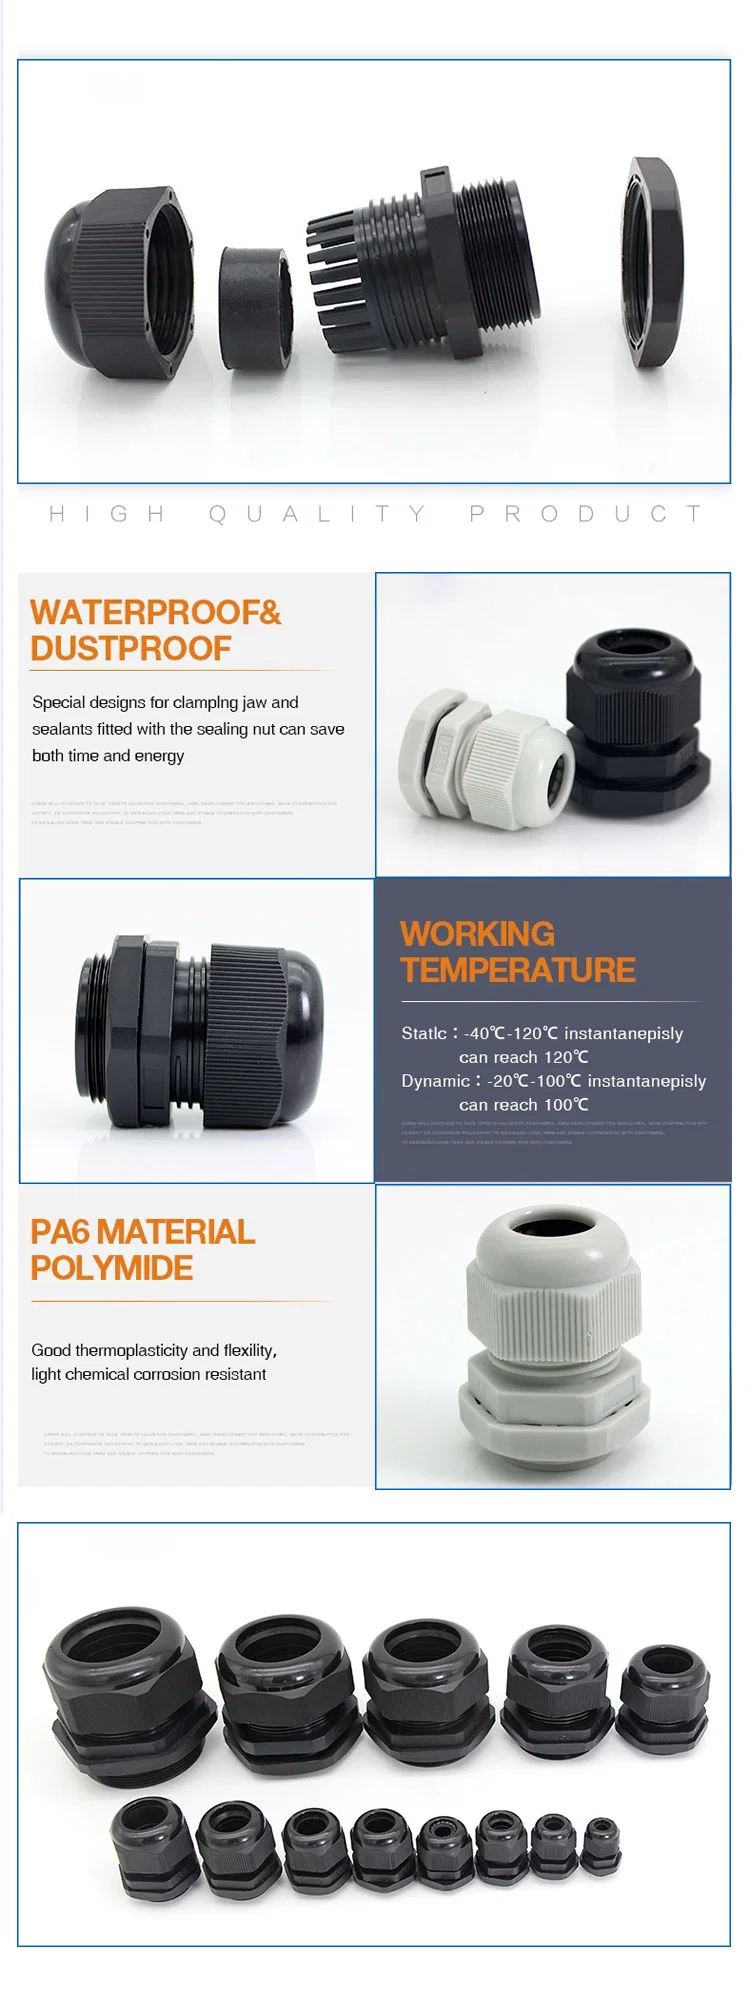 Metric Size Nylon Waterproof Cable Glands PA66 Plastic Pg/M Electrical Cable Accessories